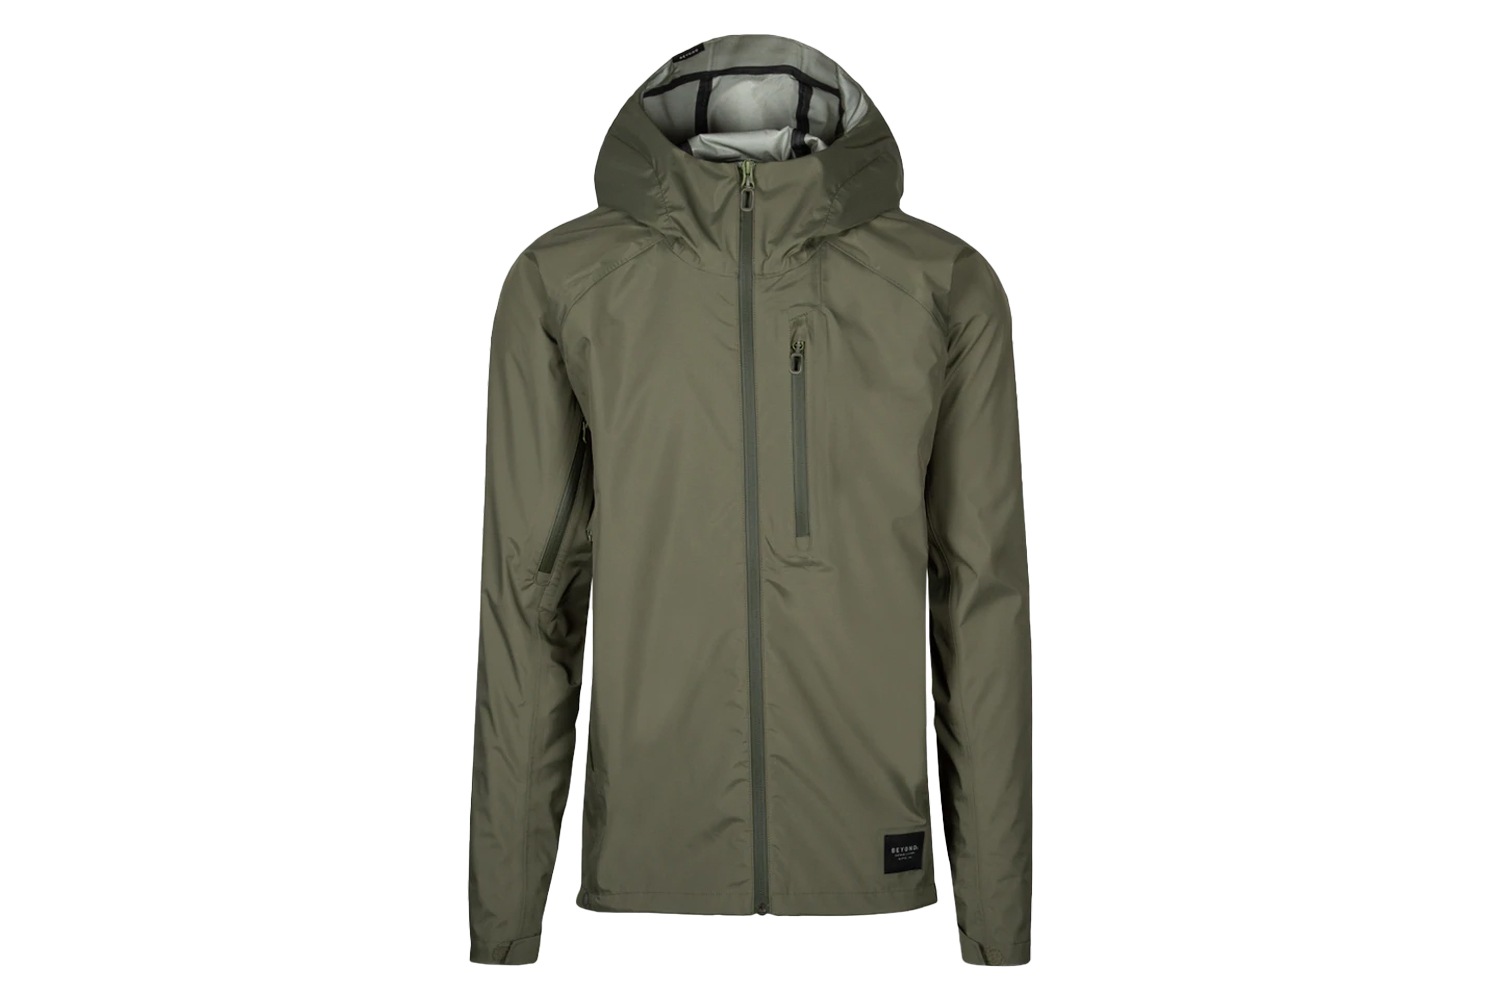 The Beyond L6 Rain Jacket is the best tactical rain jacket in 2022 for those that want a blend of comfort and features